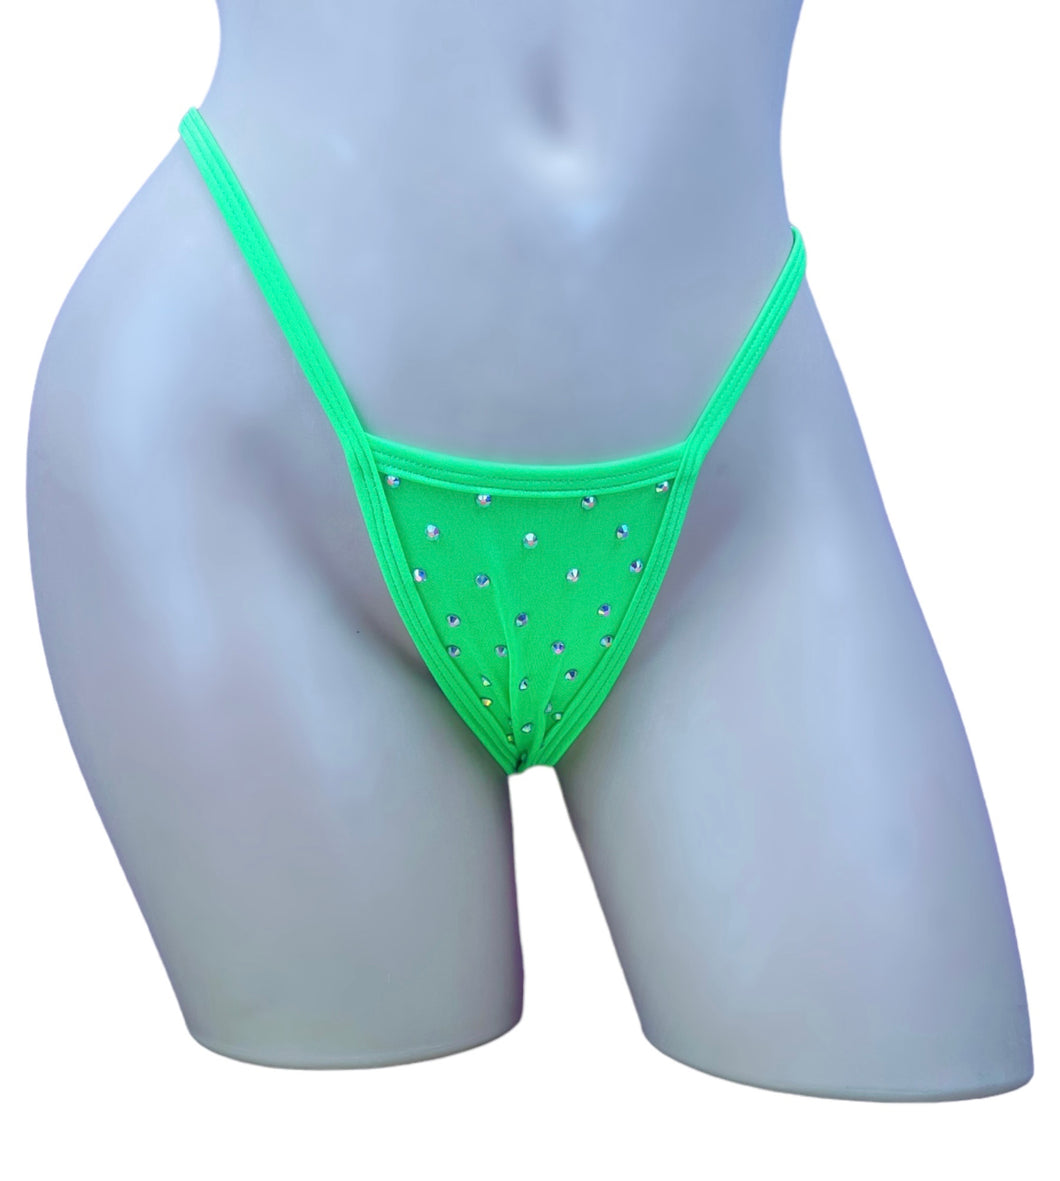 Encrusted $tripper Thong - Lime Green